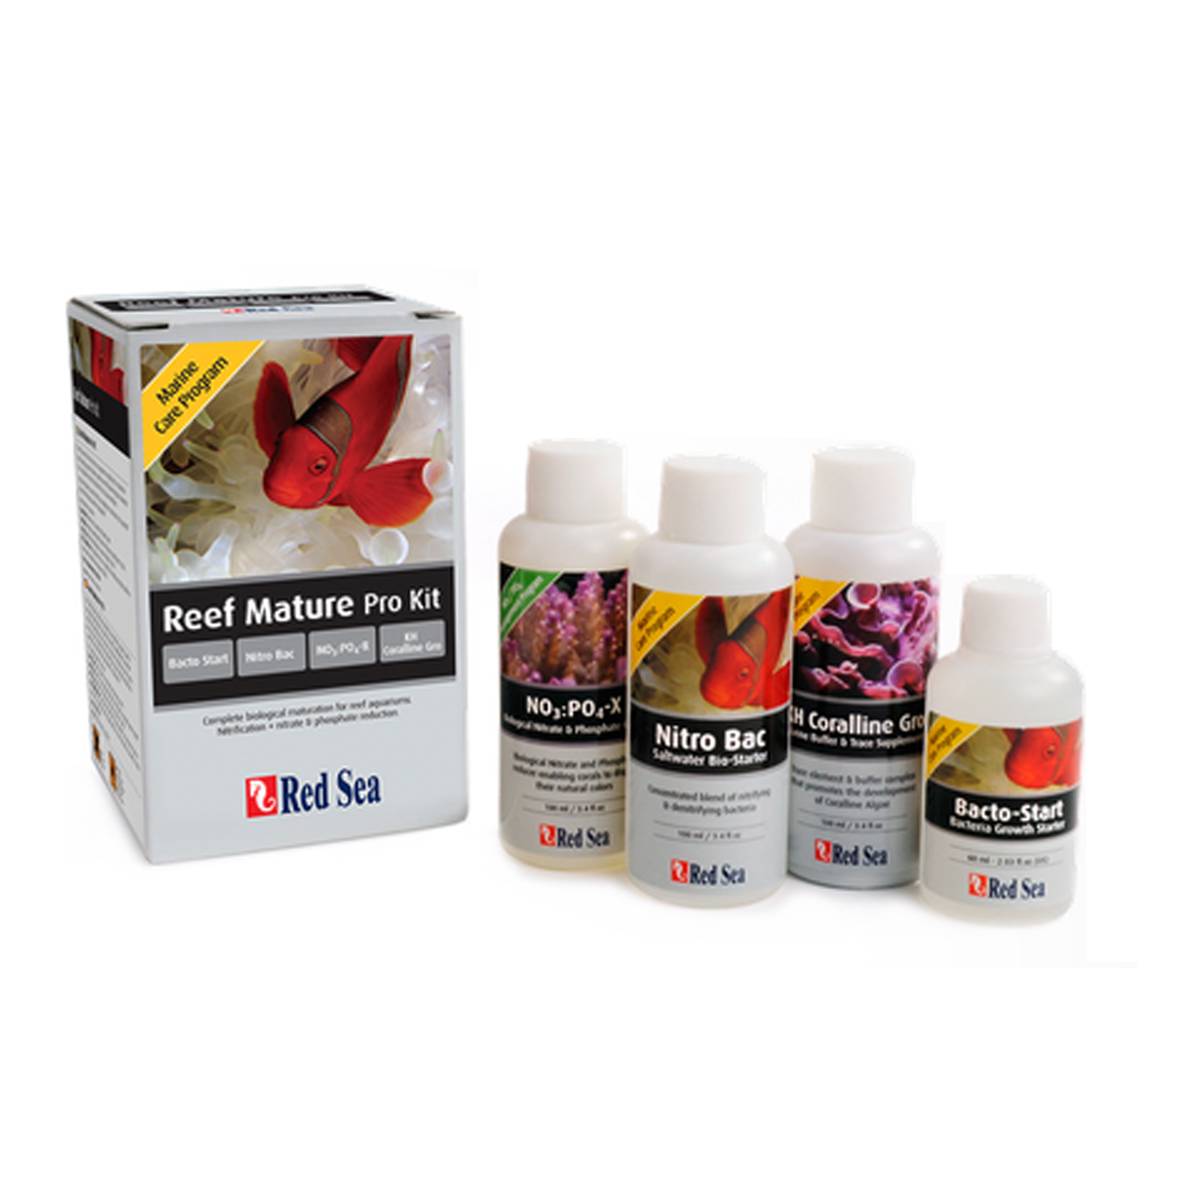 Reef Mature Pro Kit - Red Sea - Red Sea